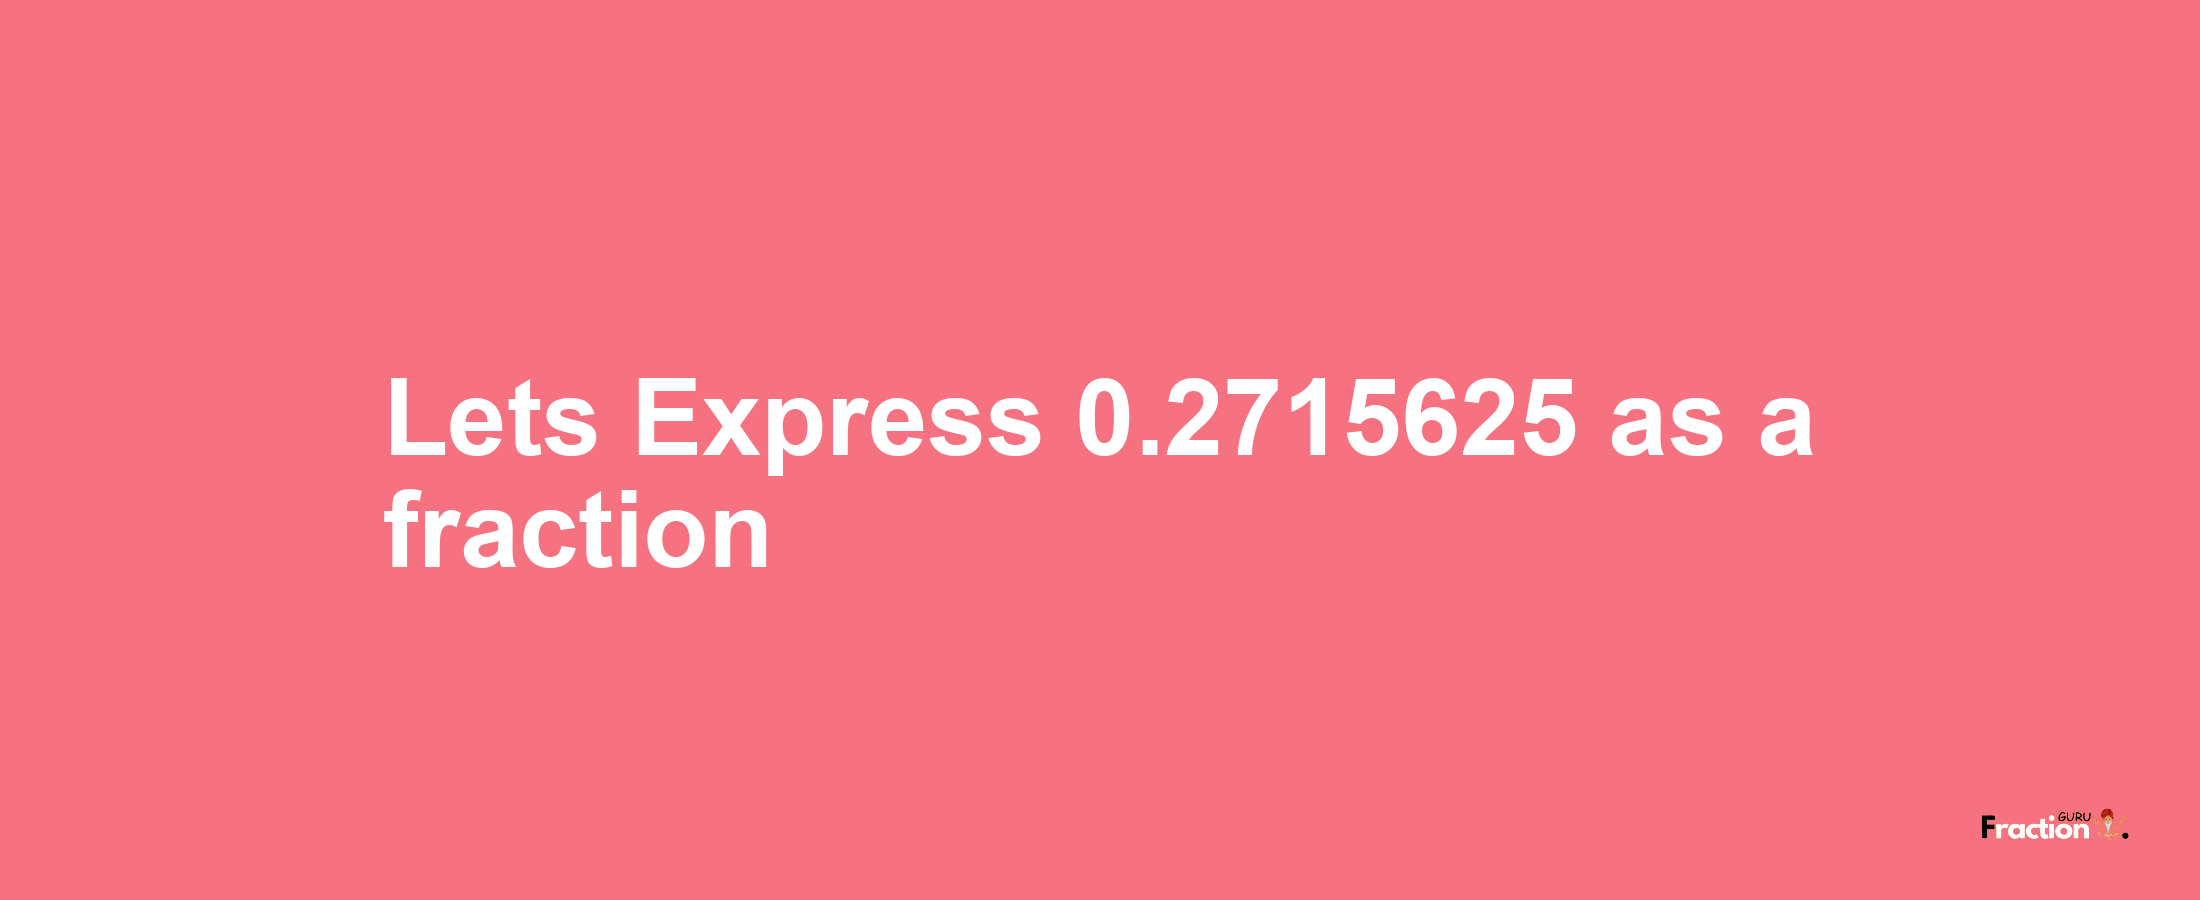 Lets Express 0.2715625 as afraction